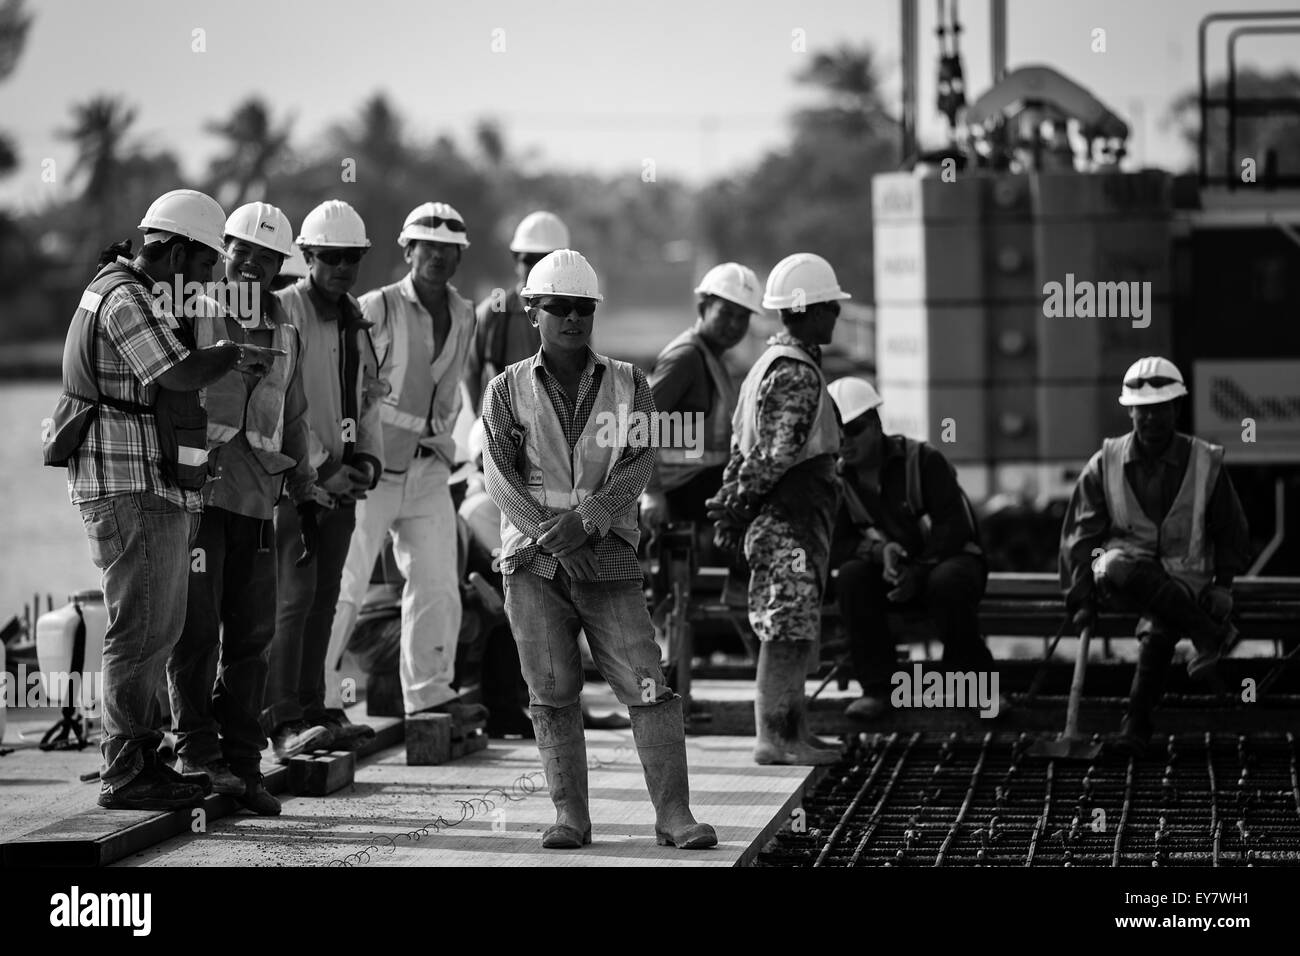 Tuxpan. 22nd July, 2015. Image taken on July 22, 2015 shows a group of employees from China and Mexico working at the construction site of the Tuxpan Port Terminal in Tuxpan city, Veracruz state, Mexico. Around 90 employees from China and 100 from Mexico have been working for a year in the construction site of the port terminal for containers, vehicles and agricultural material. This is the second construction project made by Chinese company with labor from Chinese and Mexican origins. © Pedro Mera/Xinhua/Alamy Live News Stock Photo